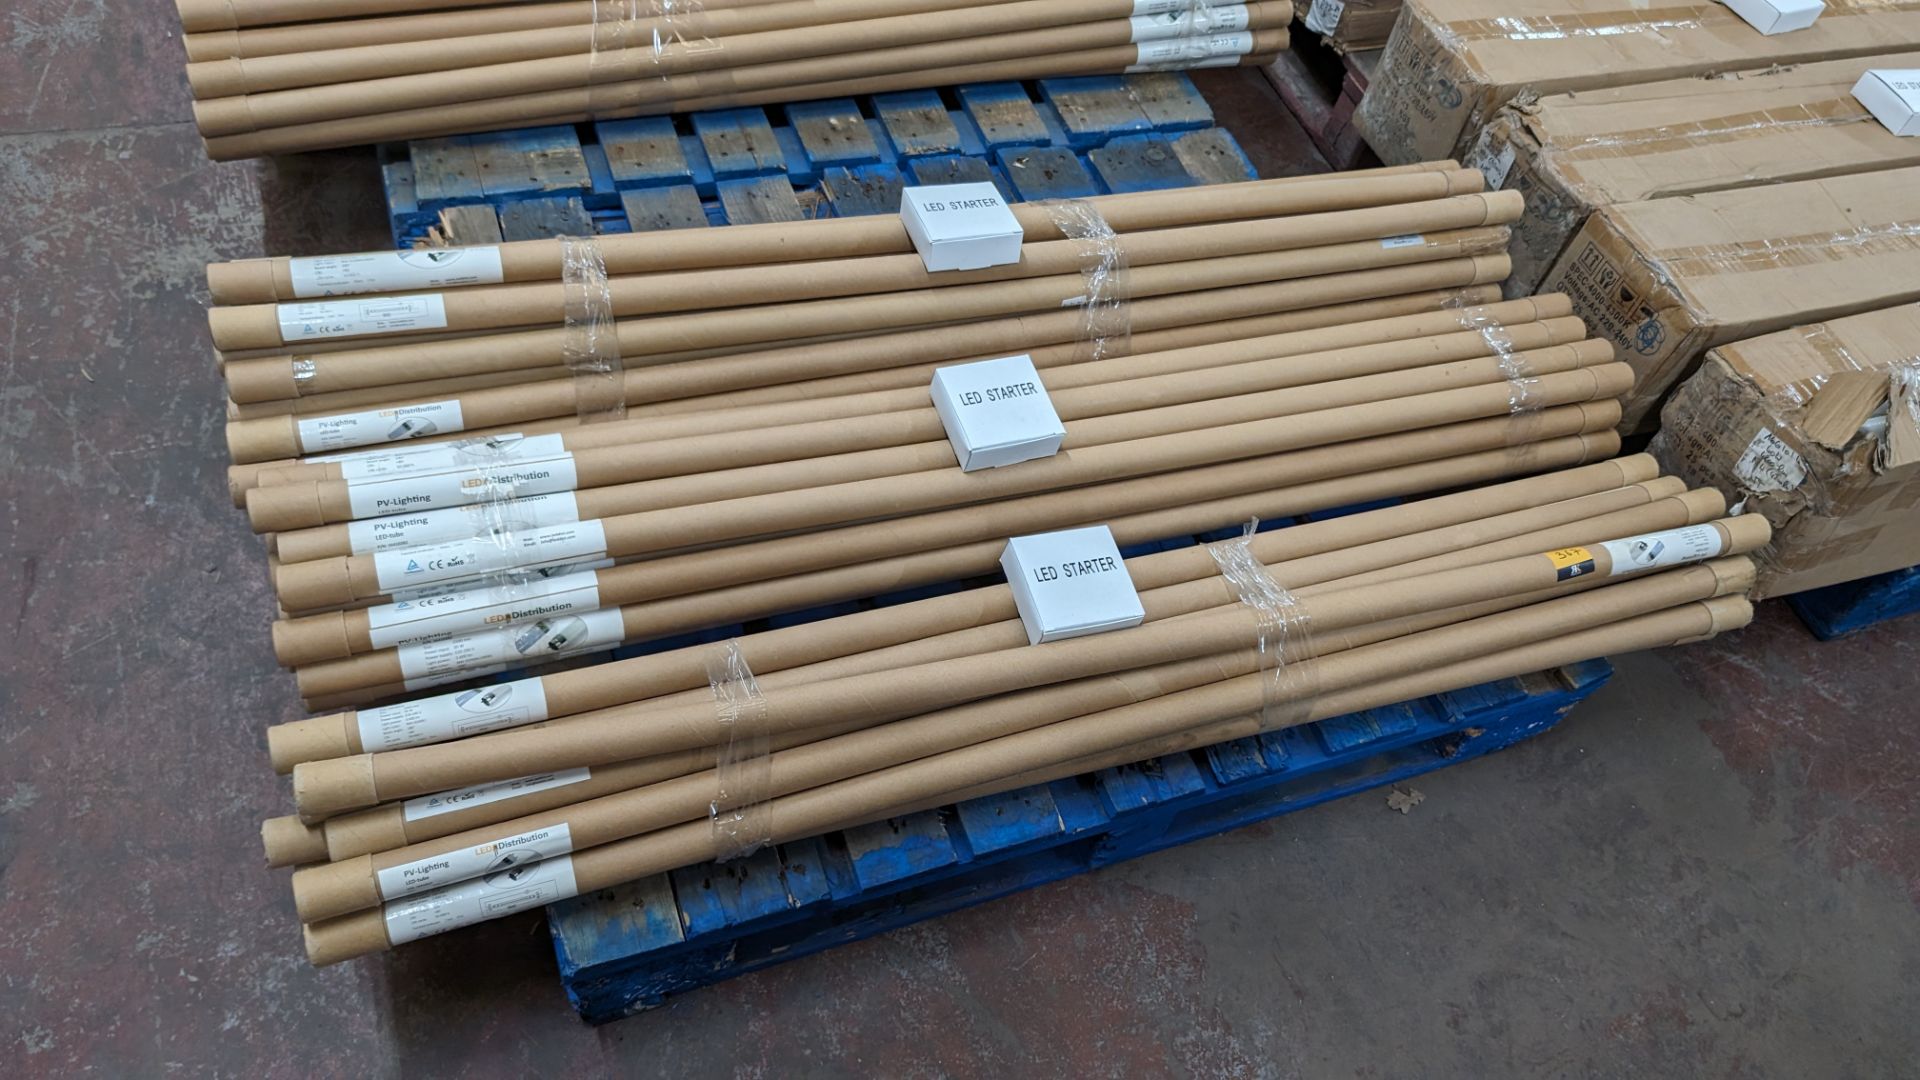 The contents of a pallet of 1500mm 30w 3600 lumens LED lighting tubes, 50,000 hours. Approximately